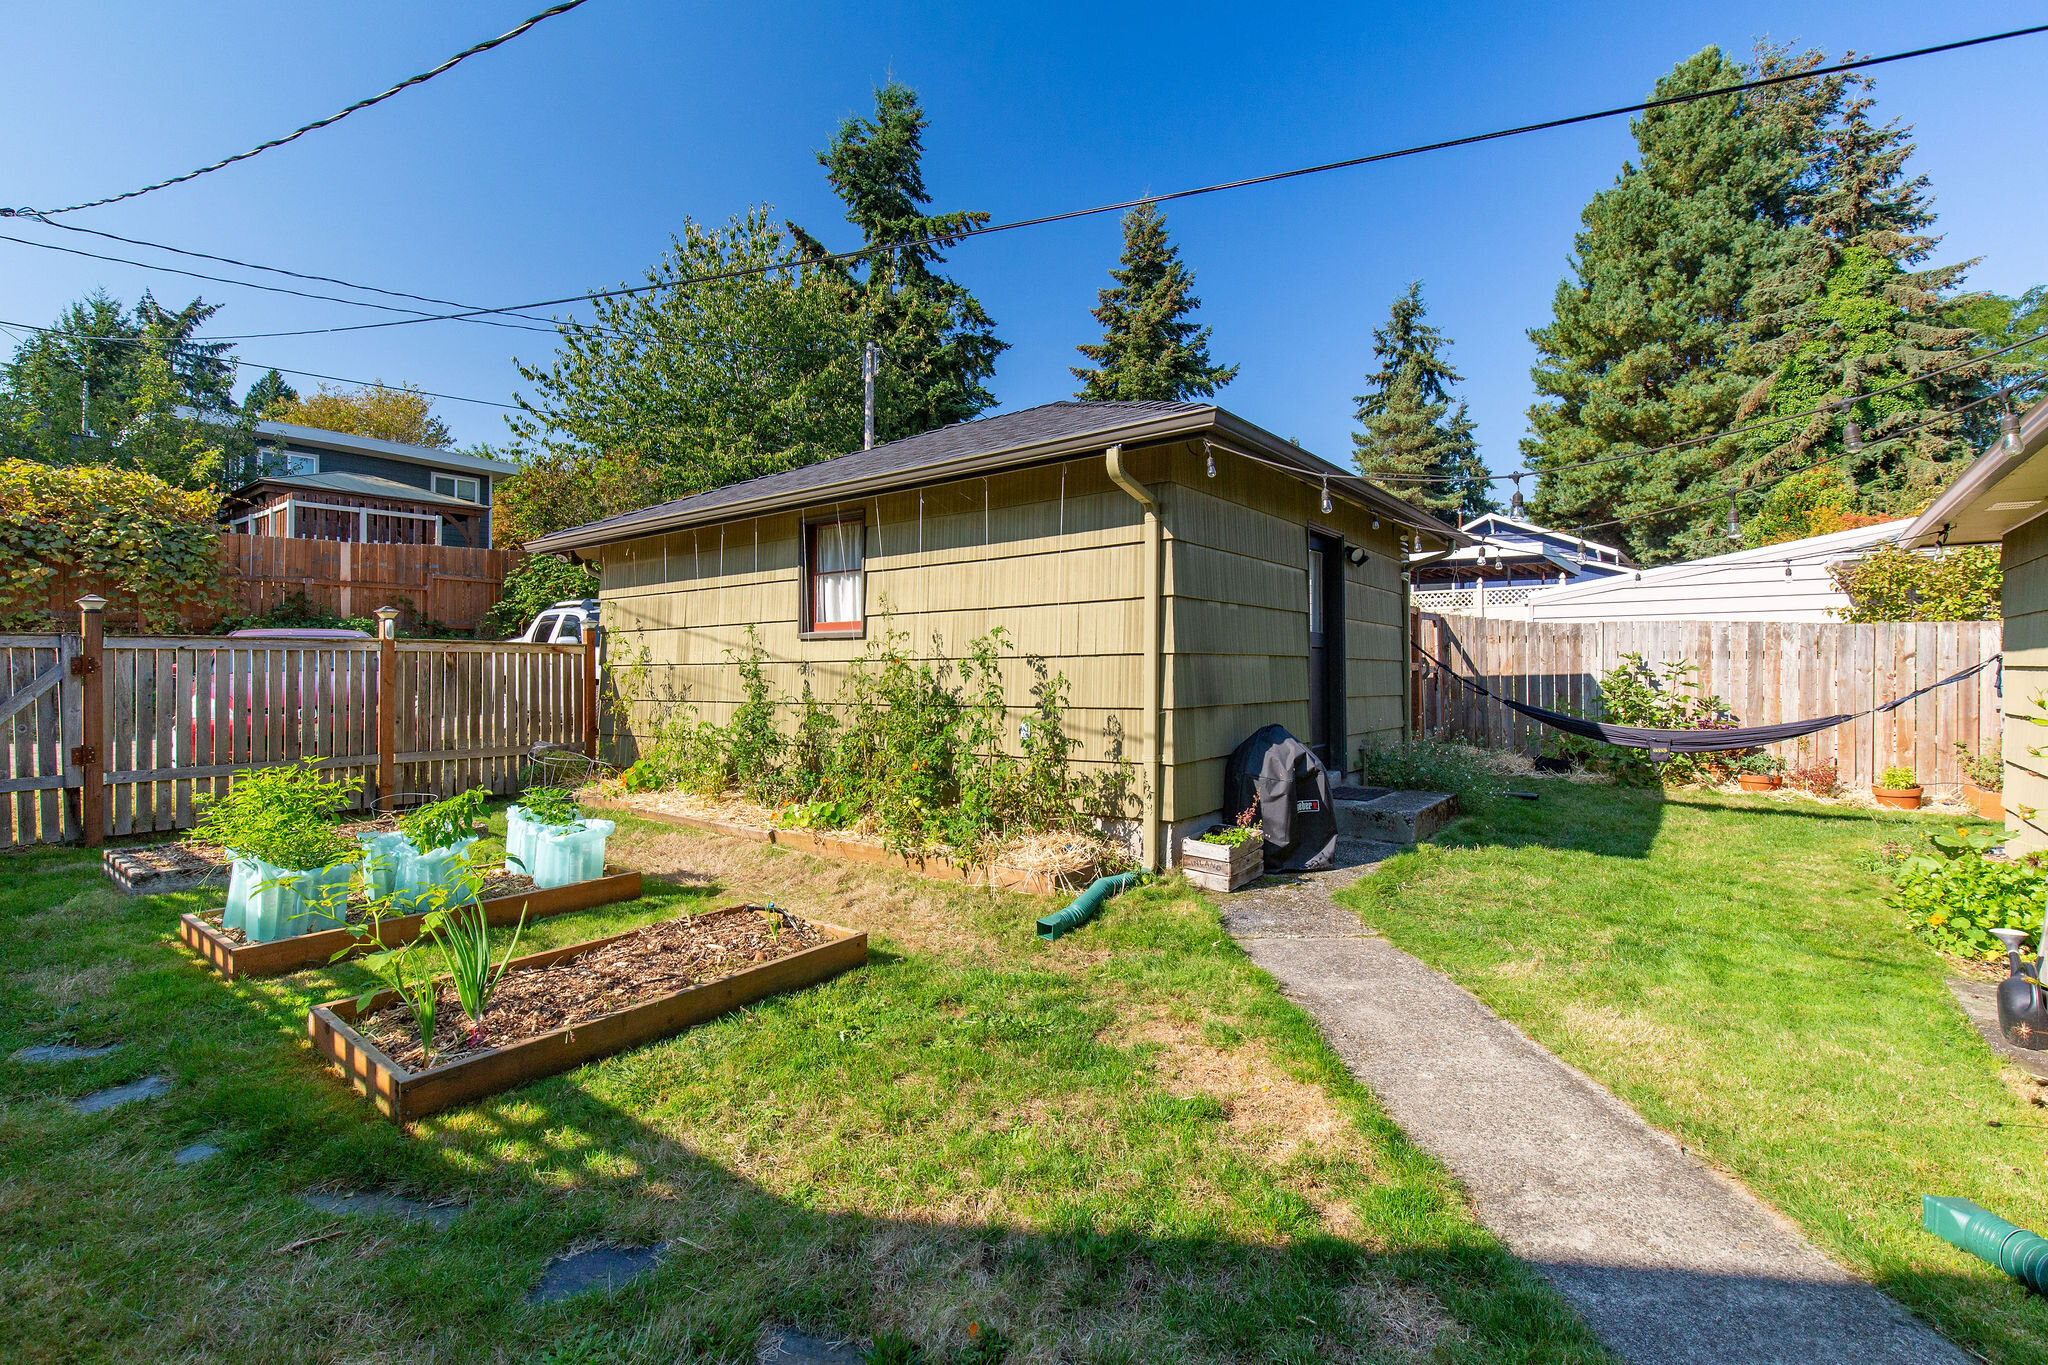  A detached garage off the alley with great storage for gardening tools and outdoor gear. There is also currently a chicken coop around the corner from the hammock that can be used or easily transformed into more garden or storage space. 